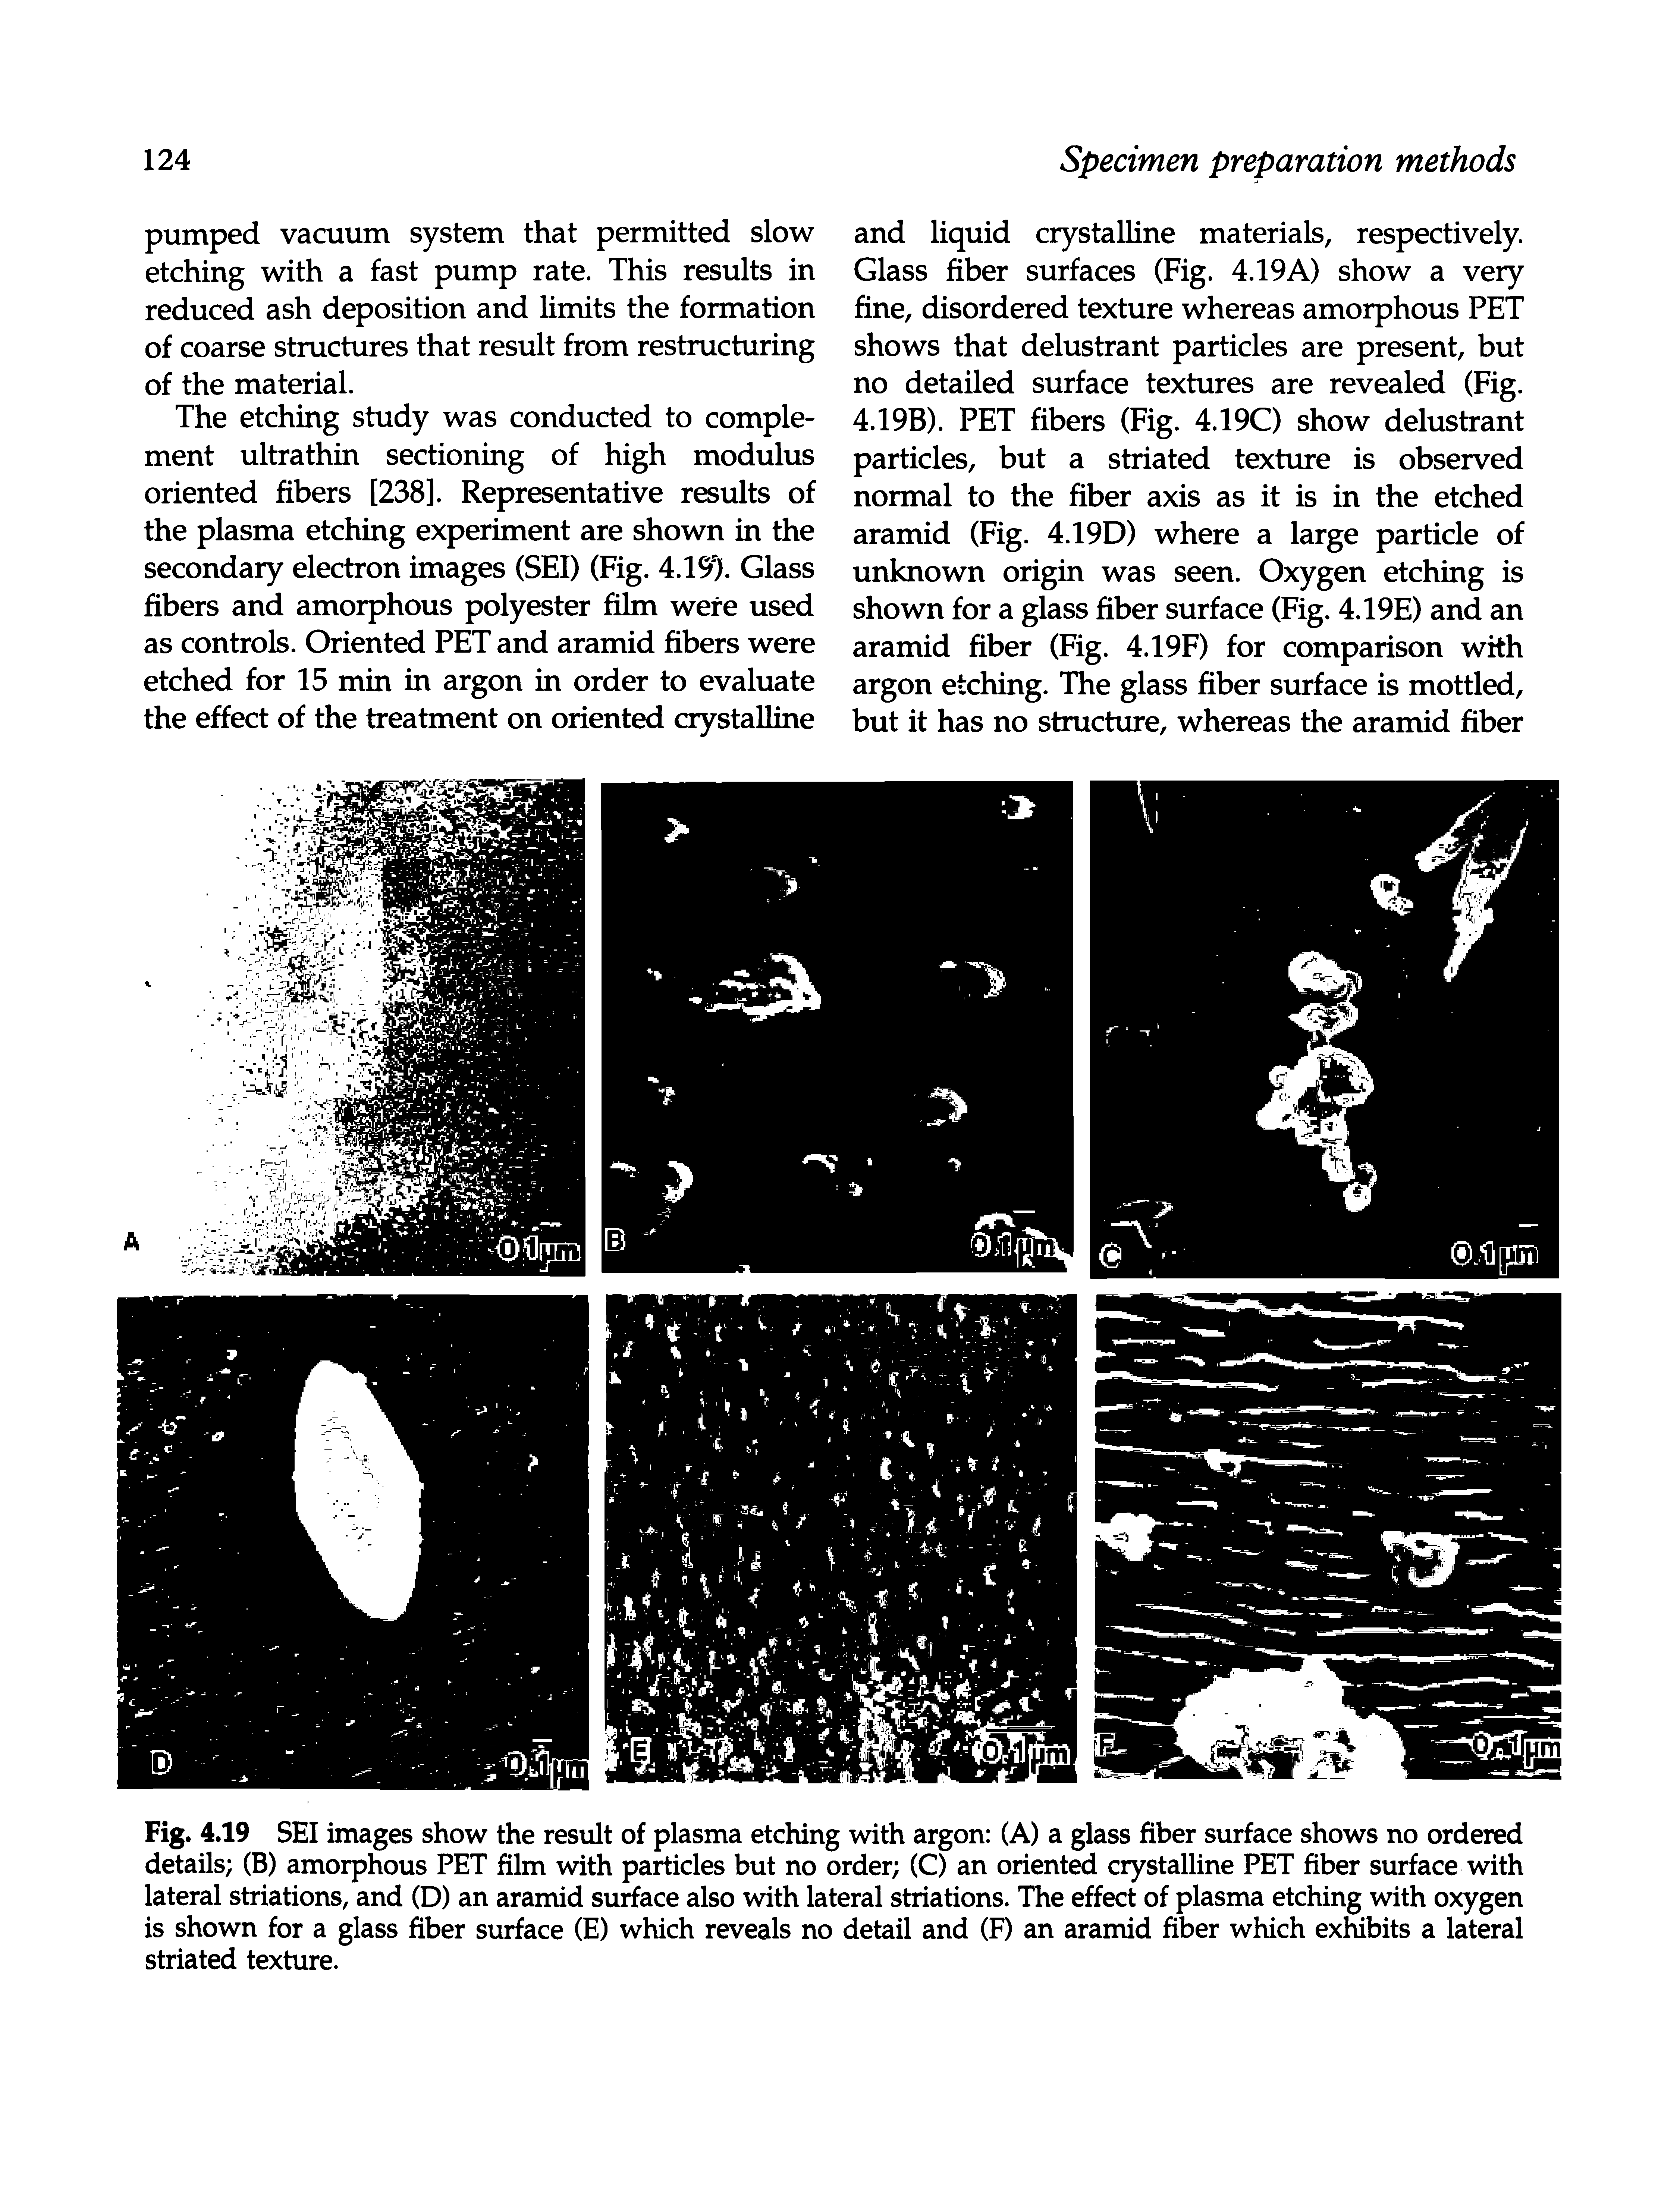 Fig. 4.19 SEI images show the result of plasma etching with argon (A) a glass fiber surface shows no ordered details (B) amorphous PET film with particles but no order (C) an orient crystalline PET fiber surface with lateral striations, and (D) an aramid surface also with lateral striations. The effect of plasma etching with oxygen is shown for a glass fiber surface (E) which reveals no detail and (F) an aramid fiber which exWbits a lateral striated texture.